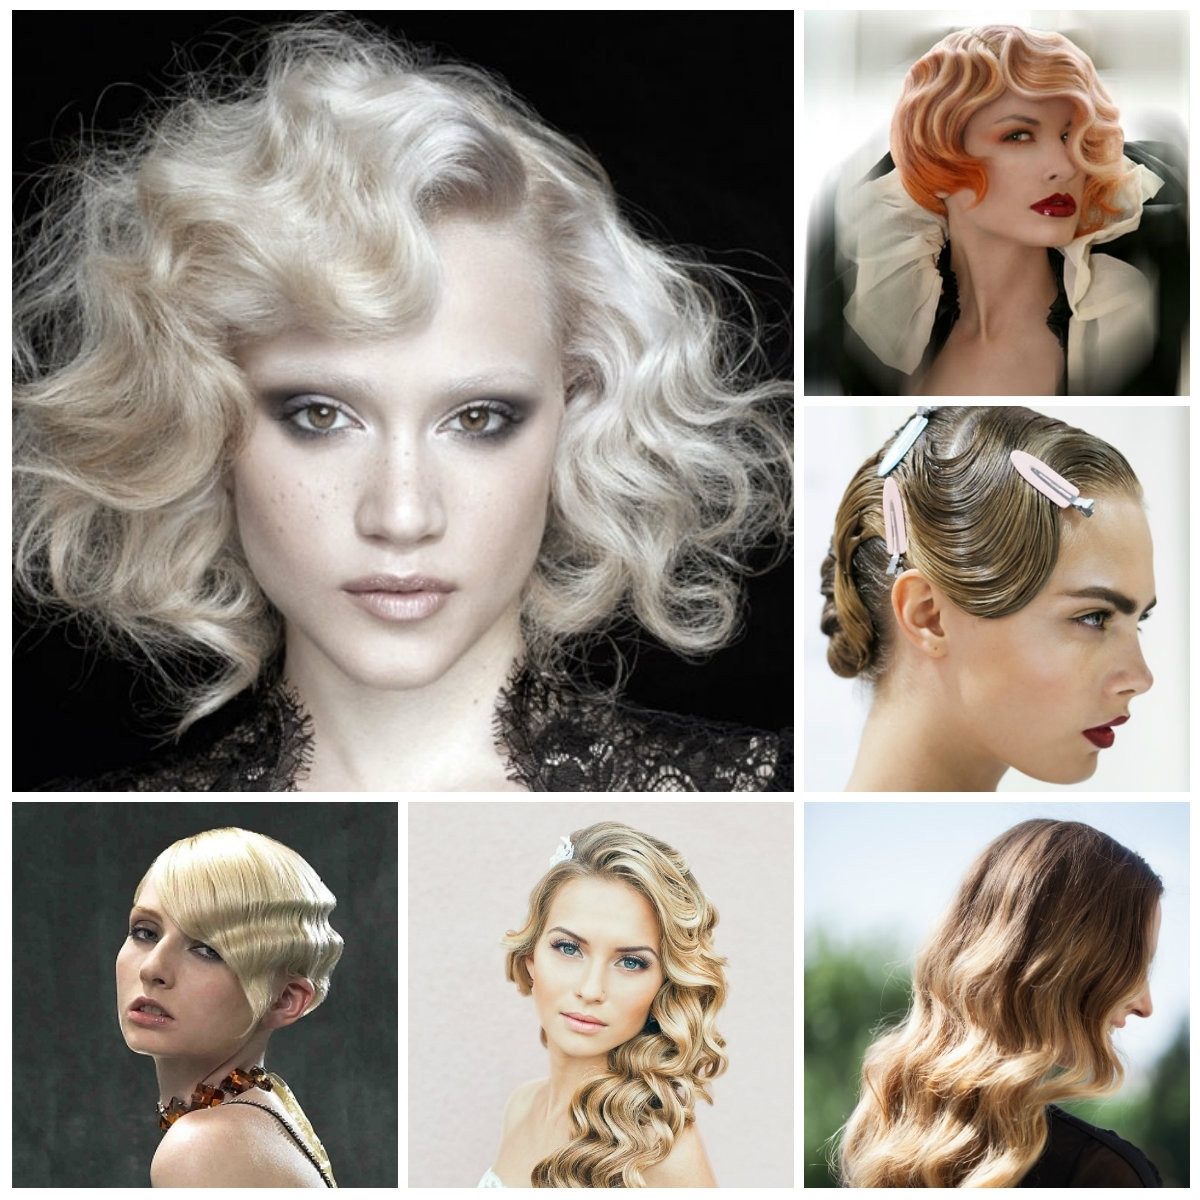 Finger Waves Updo Hairstyles
 15 Best Ideas of Finger Waves Long Hair Updo Hairstyles